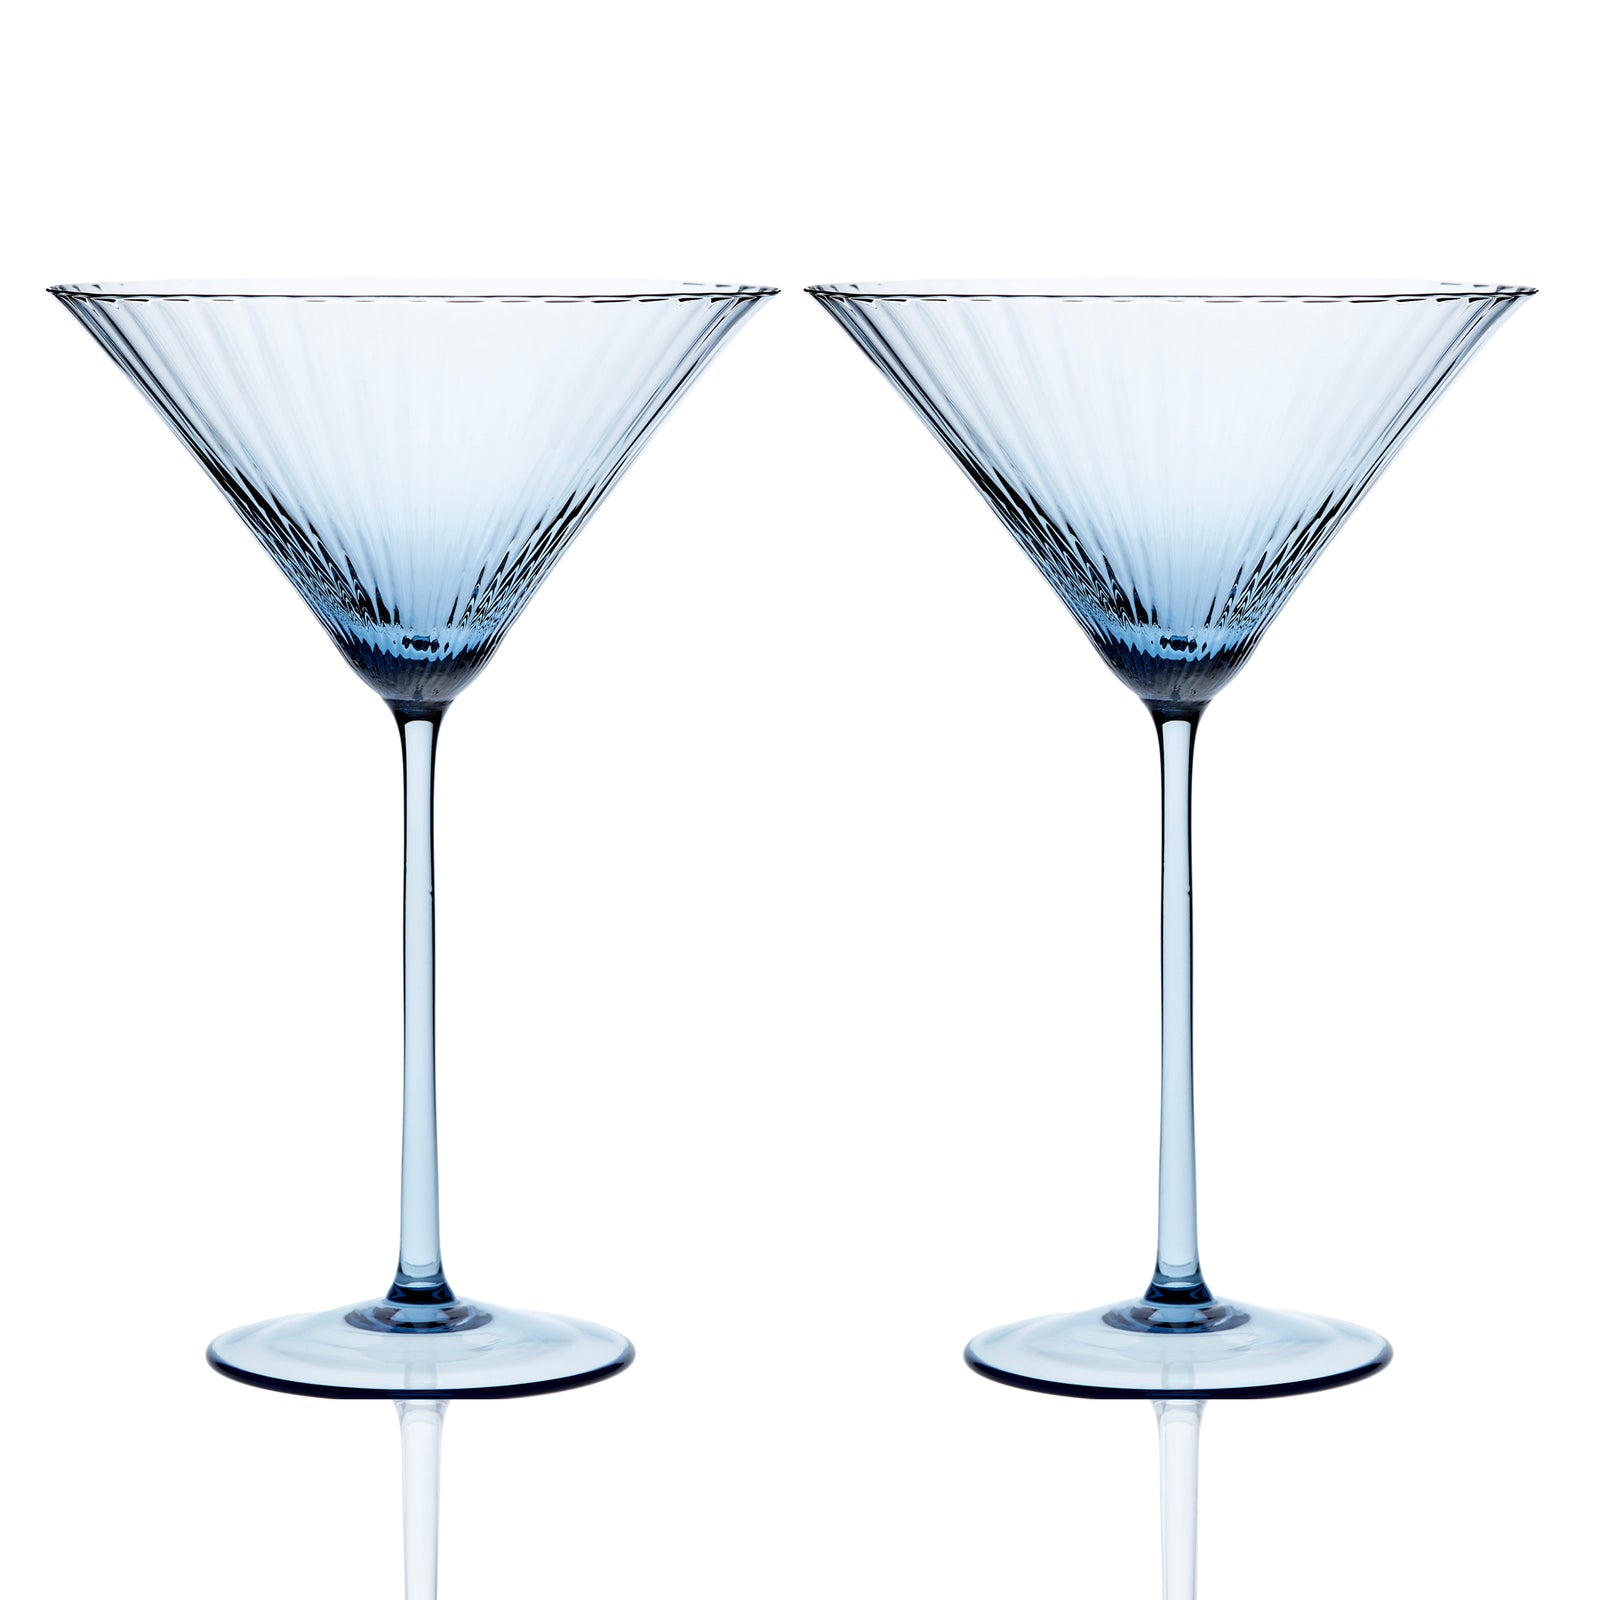 Food52 Antique-Inspired Etched Martini & Cocktail Glasses, 5 Set Options,  Lead Free Crystalline